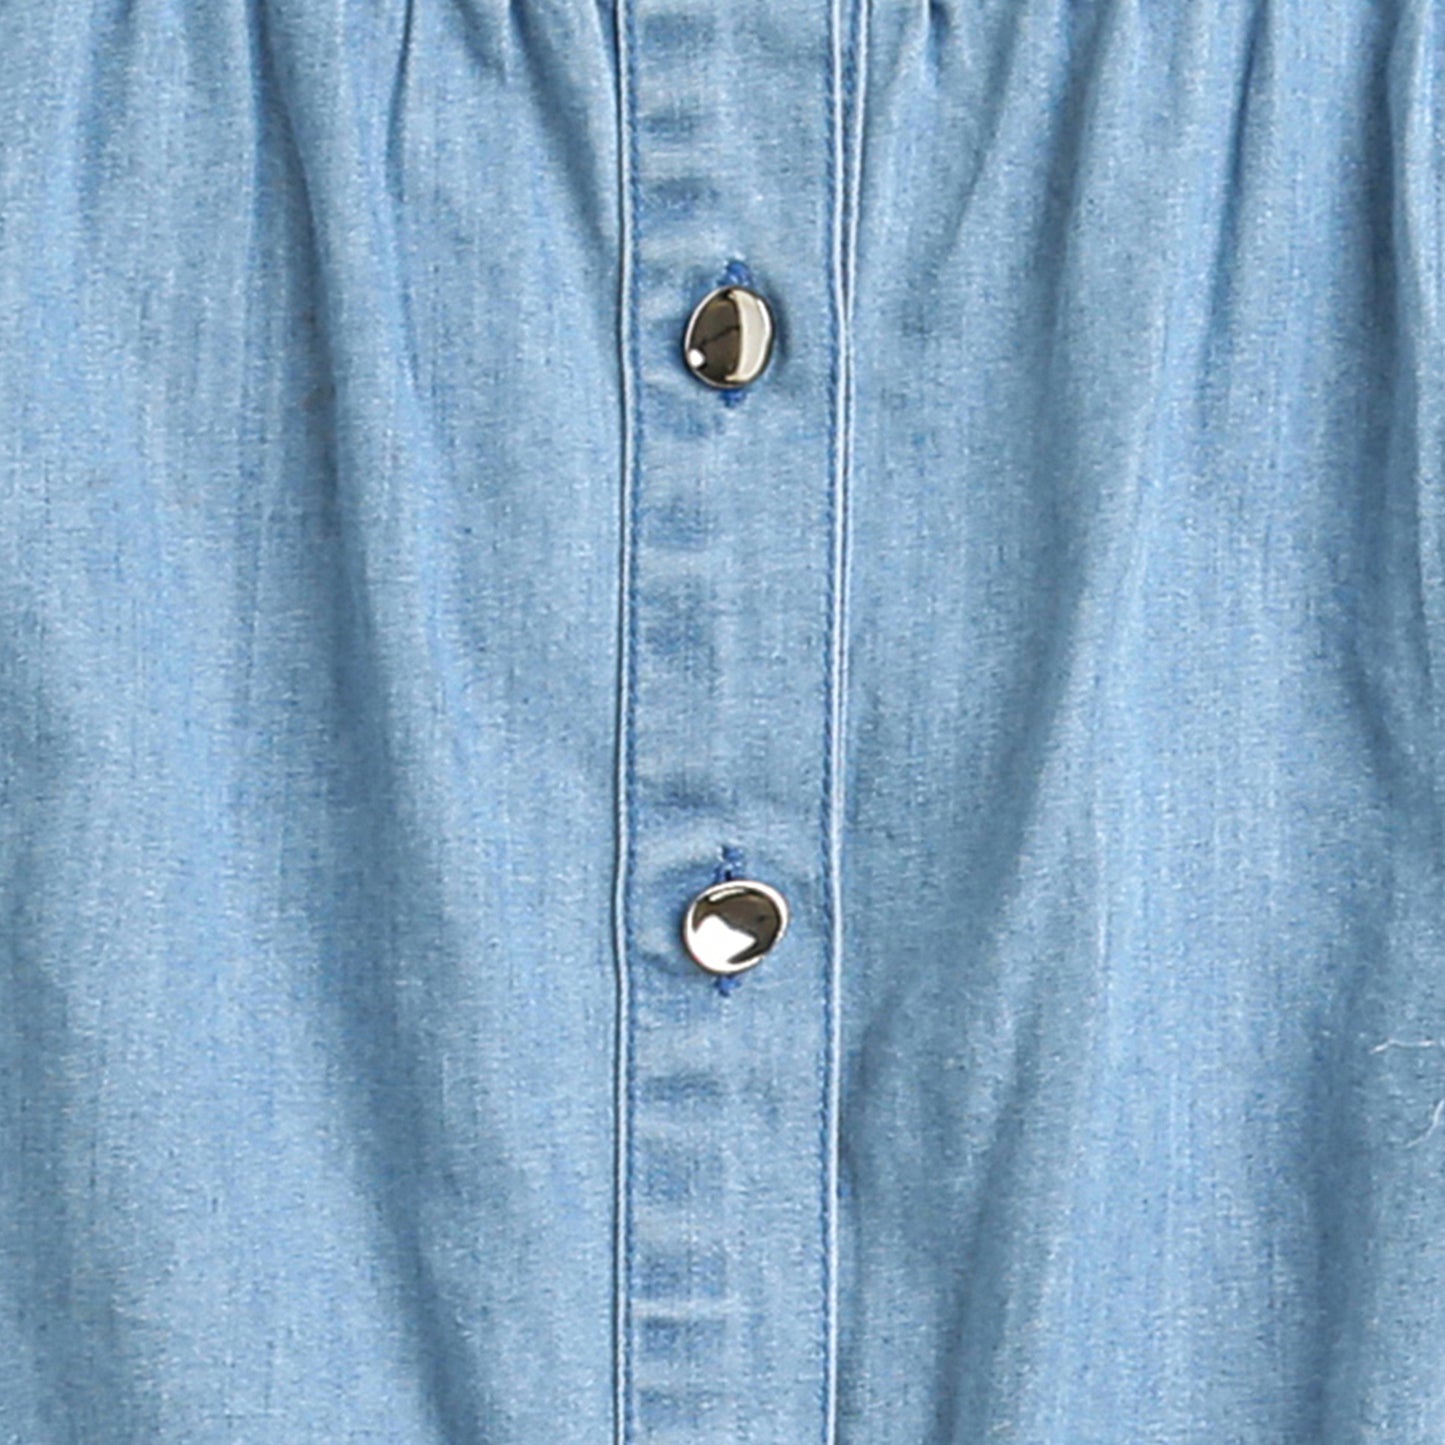 Collar Shirt With Buttons In Front And Knot